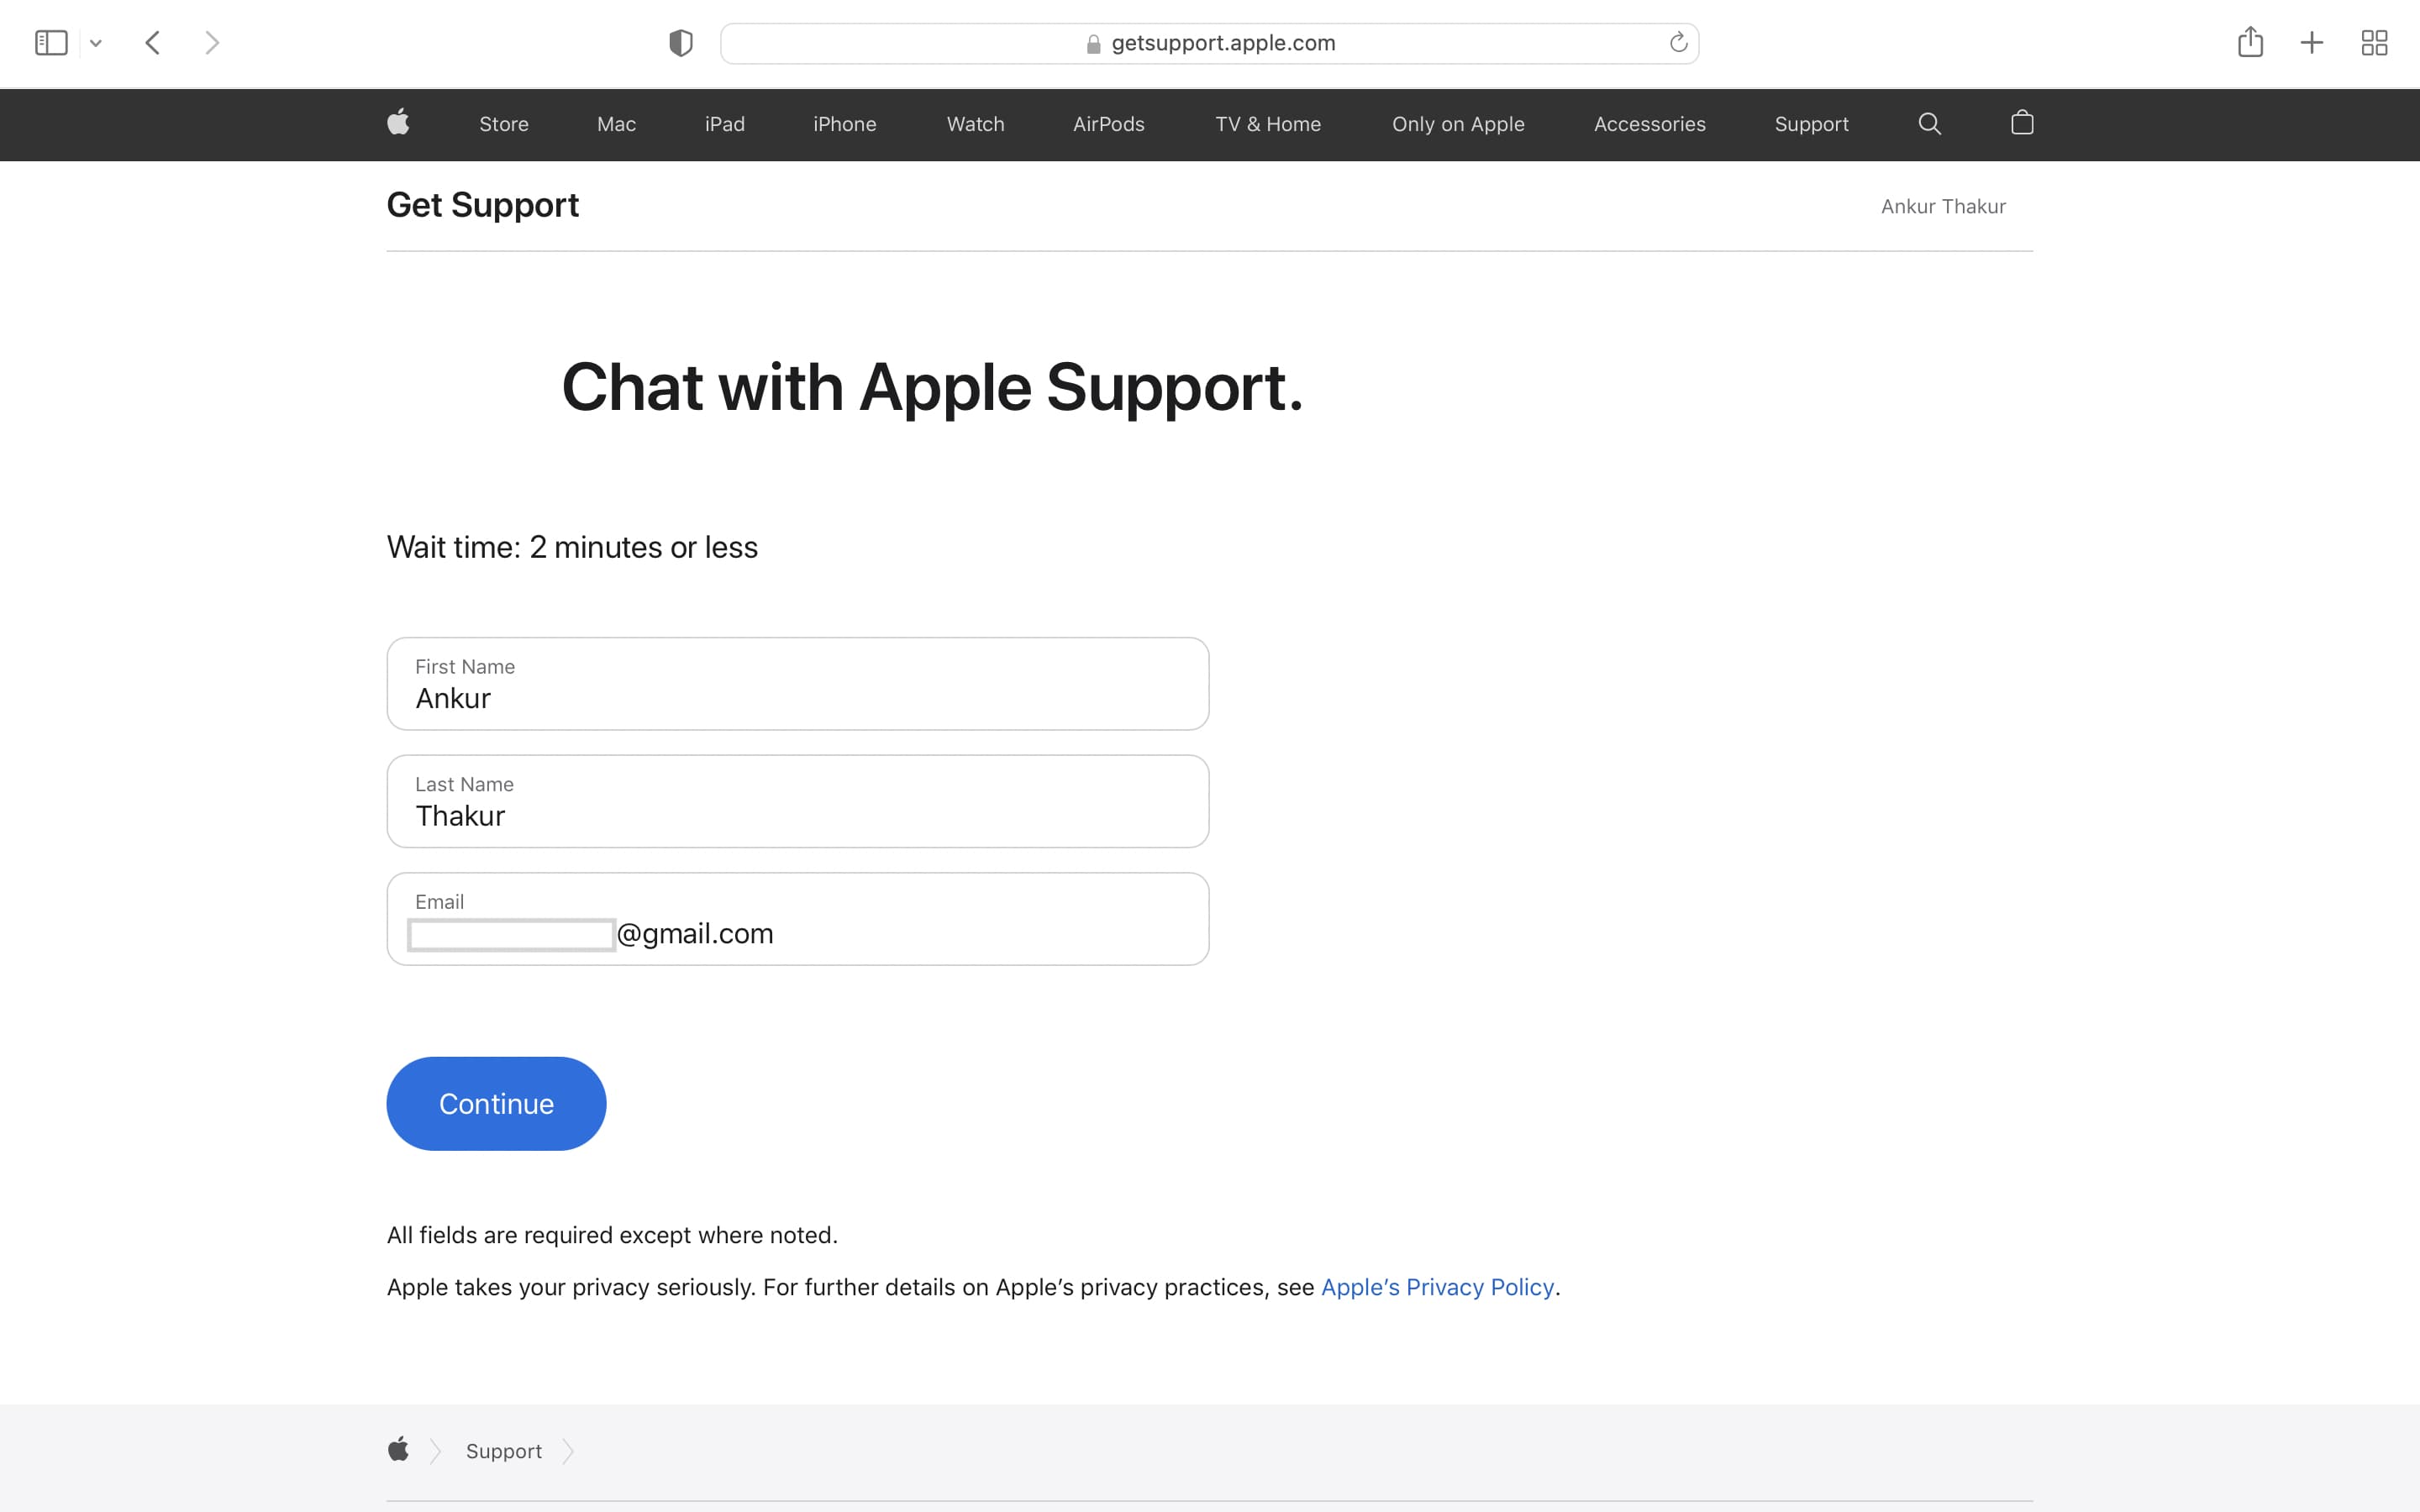 Start Chat with Apple Support on the web